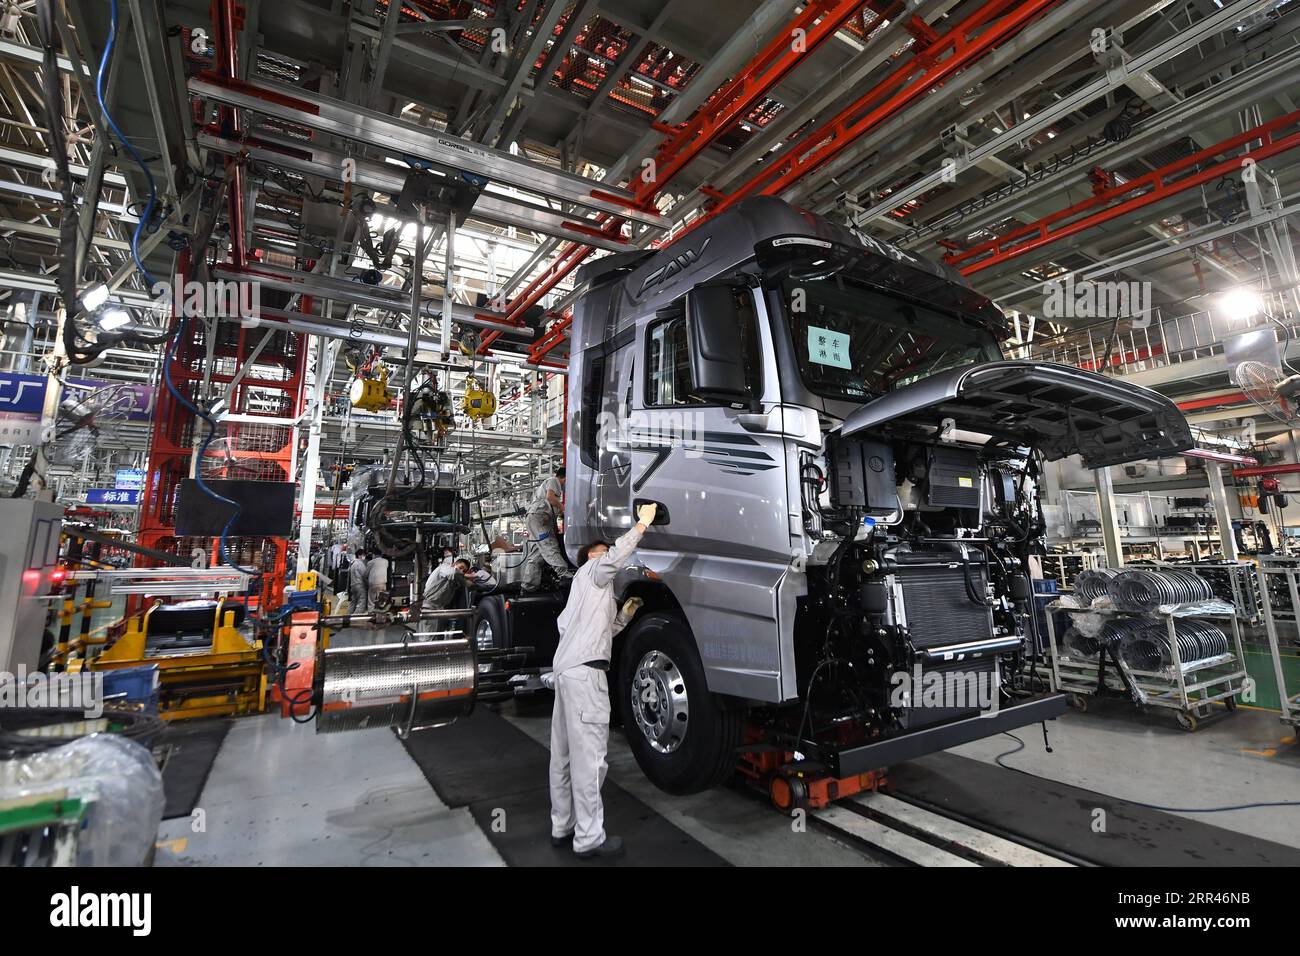 201122 -- GUANGZHOU, Nov. 22, 2020 -- Workers assemble vehicles at a factory of the First Automotive Works FAW Group Co., Ltd. in Changchun, northeast China s Jilin Province, Sept. 23, 2020. TO GO WITH XINHUA HEADLINES OF NOV. 22, 2020  CHINA-POST-PANDEMIC ERA-BLUEPRINT CN ZhangxNan PUBLICATIONxNOTxINxCHN Stock Photo